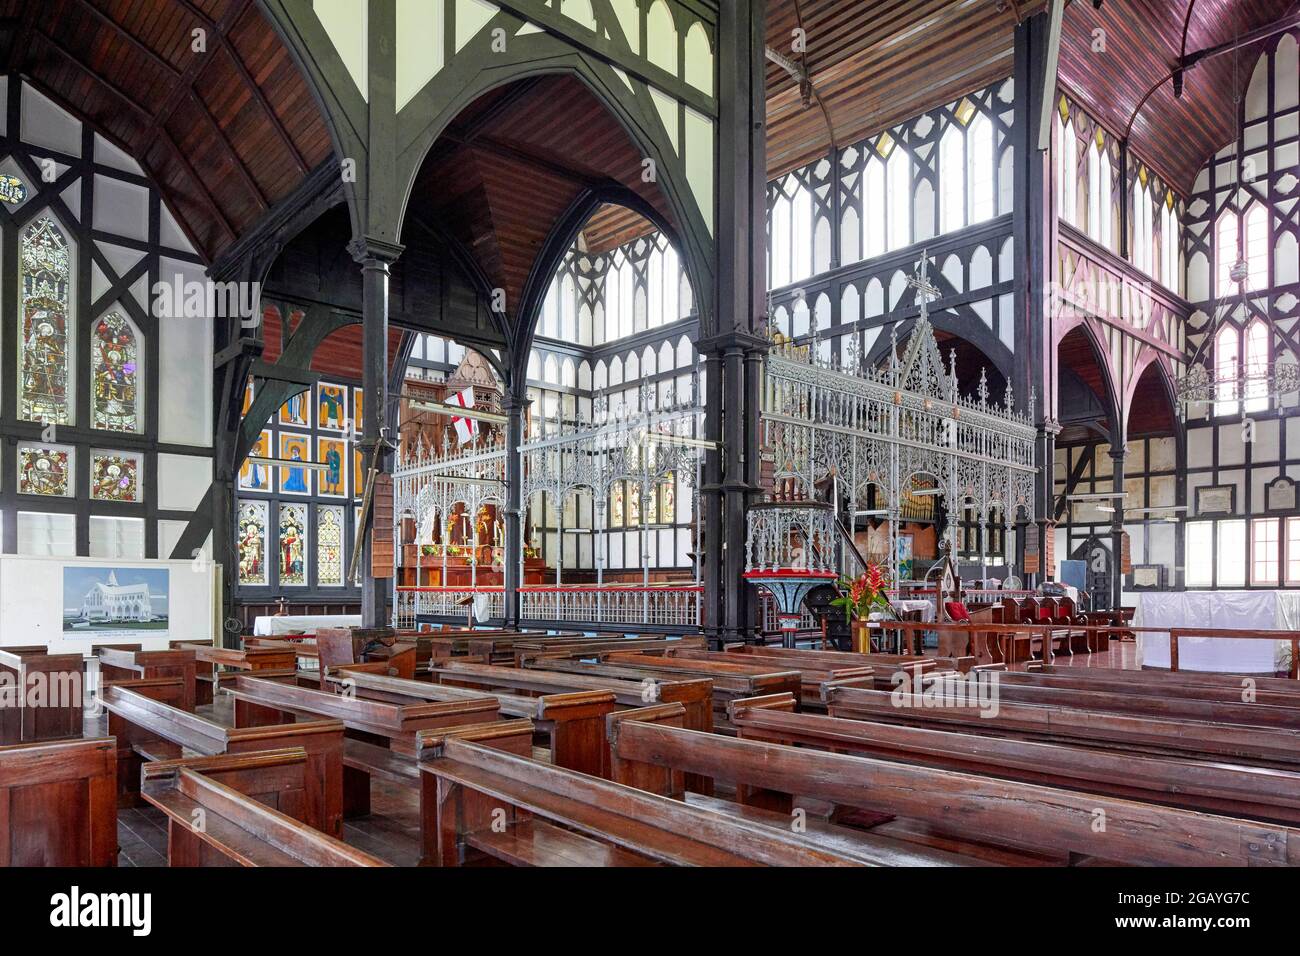 Interior of Saint George's Anglican Cathedral in Georgetown, Guyana, South America Stock Photo